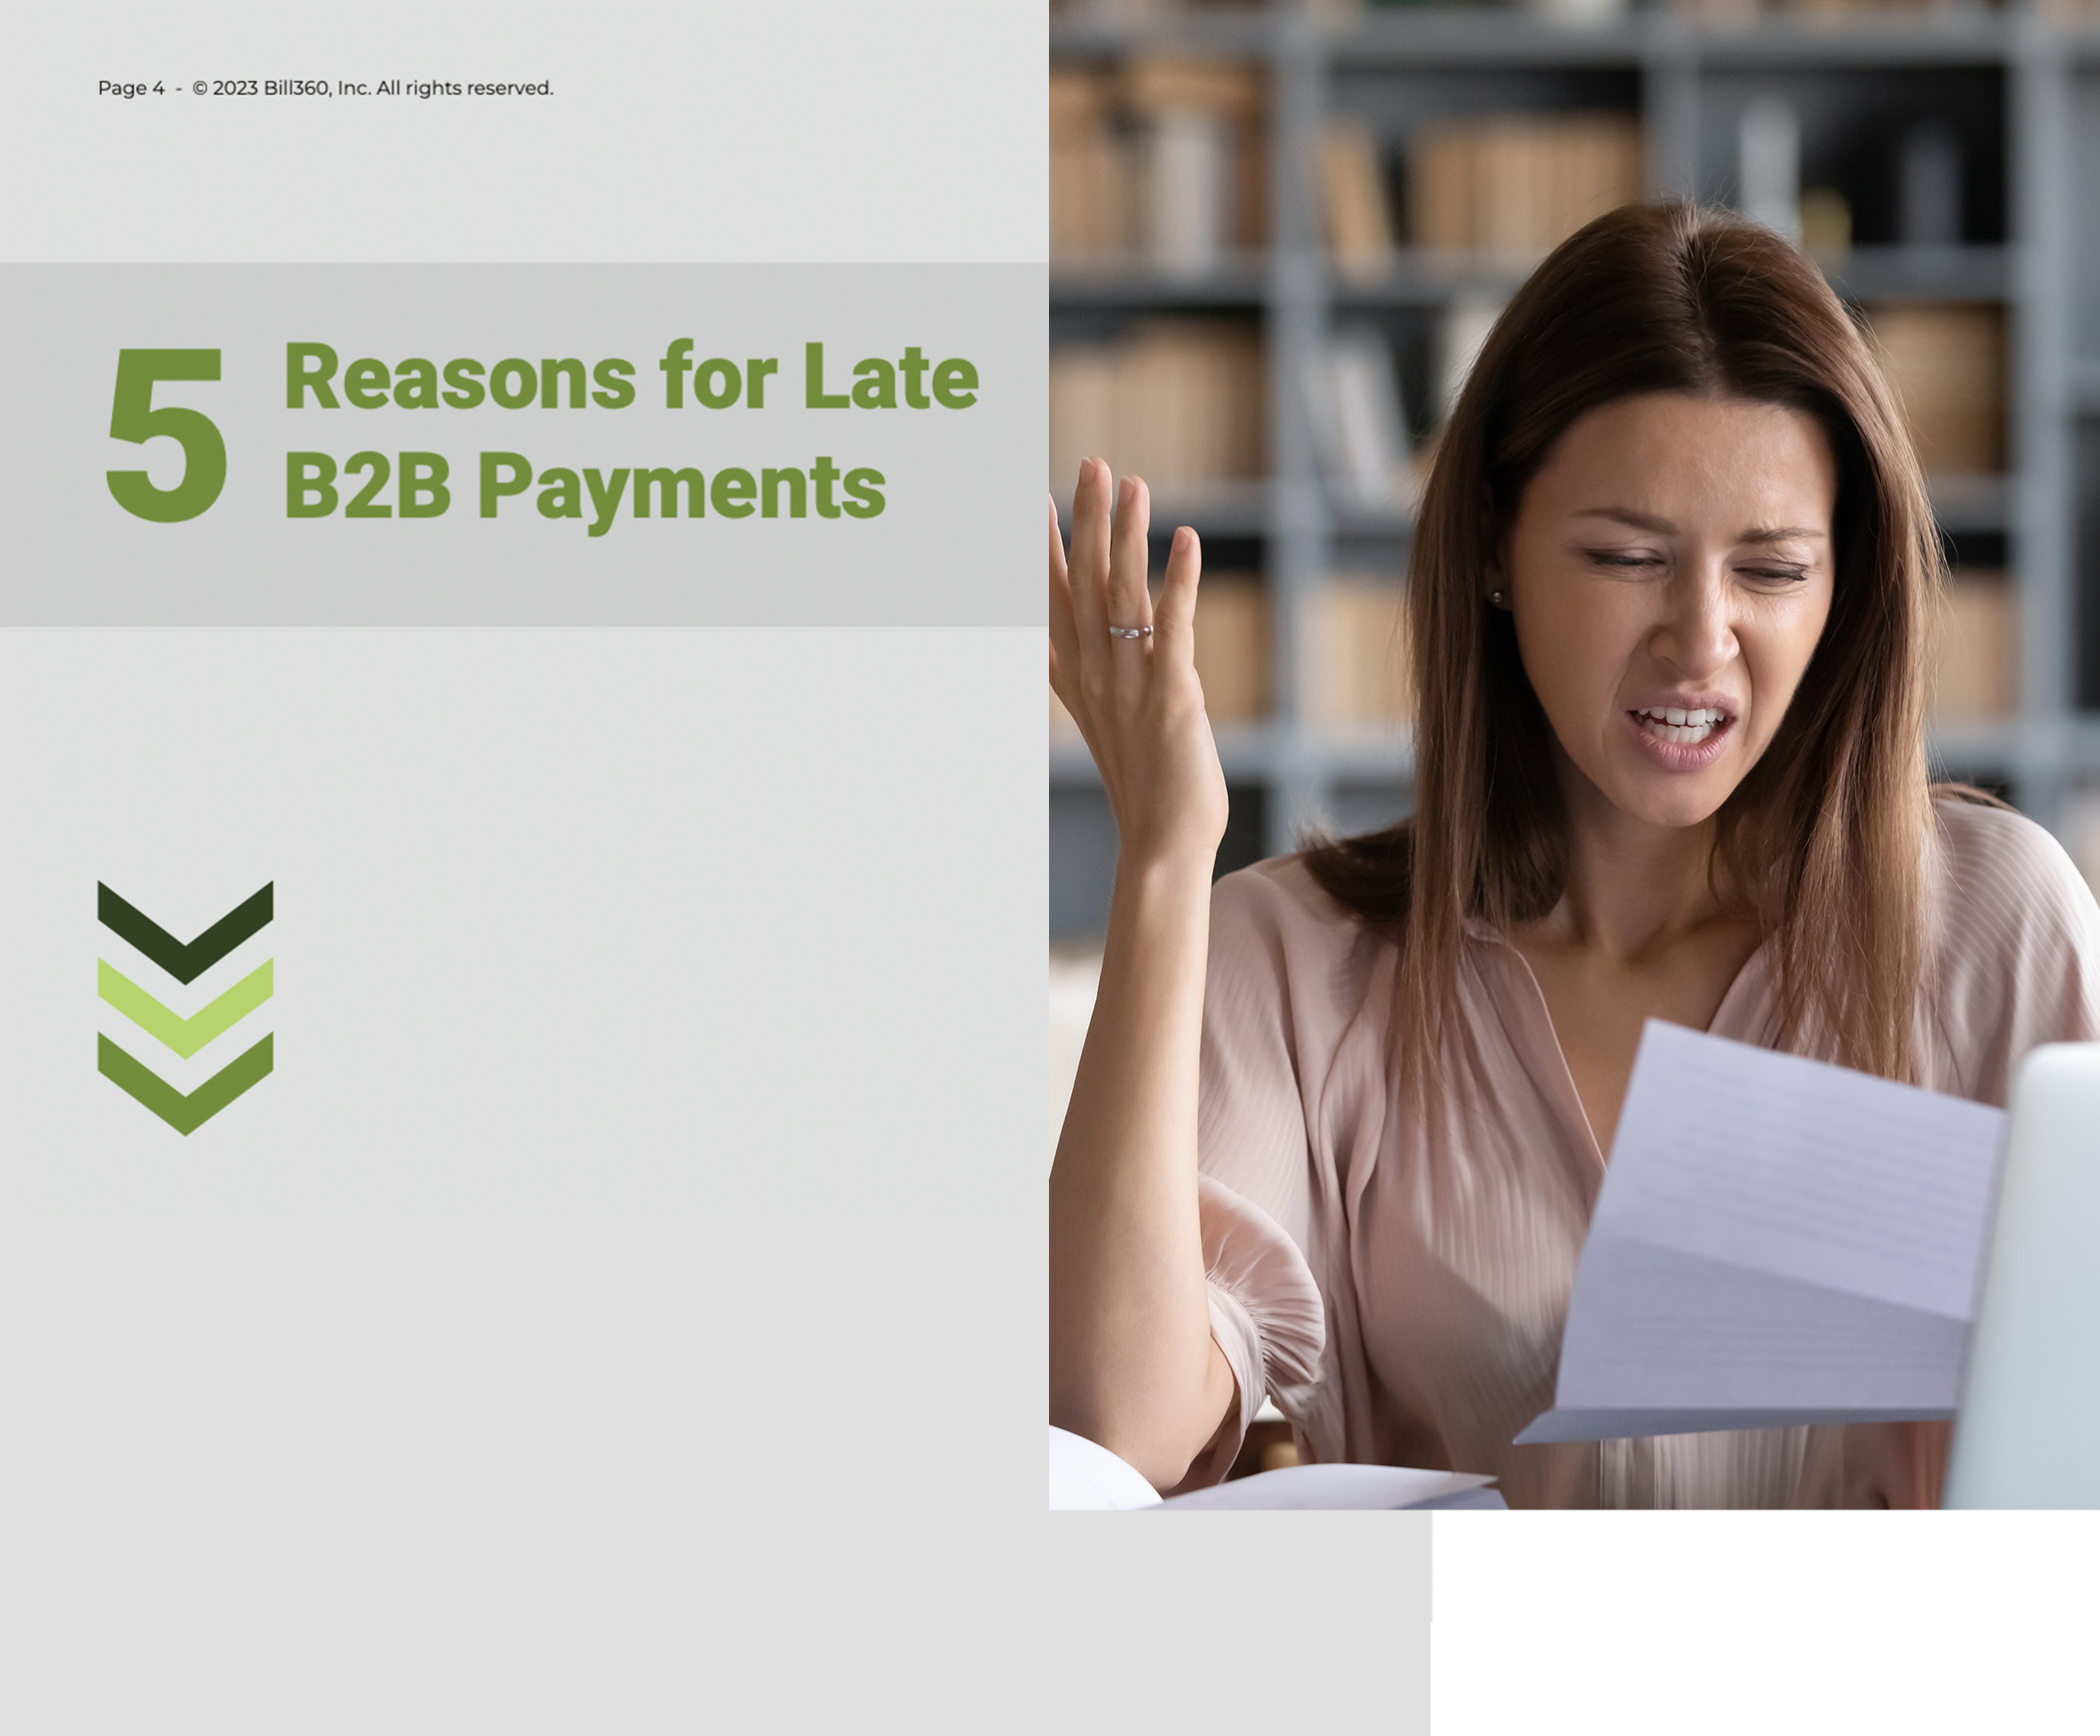 5 Reasons for Late B2B Payments